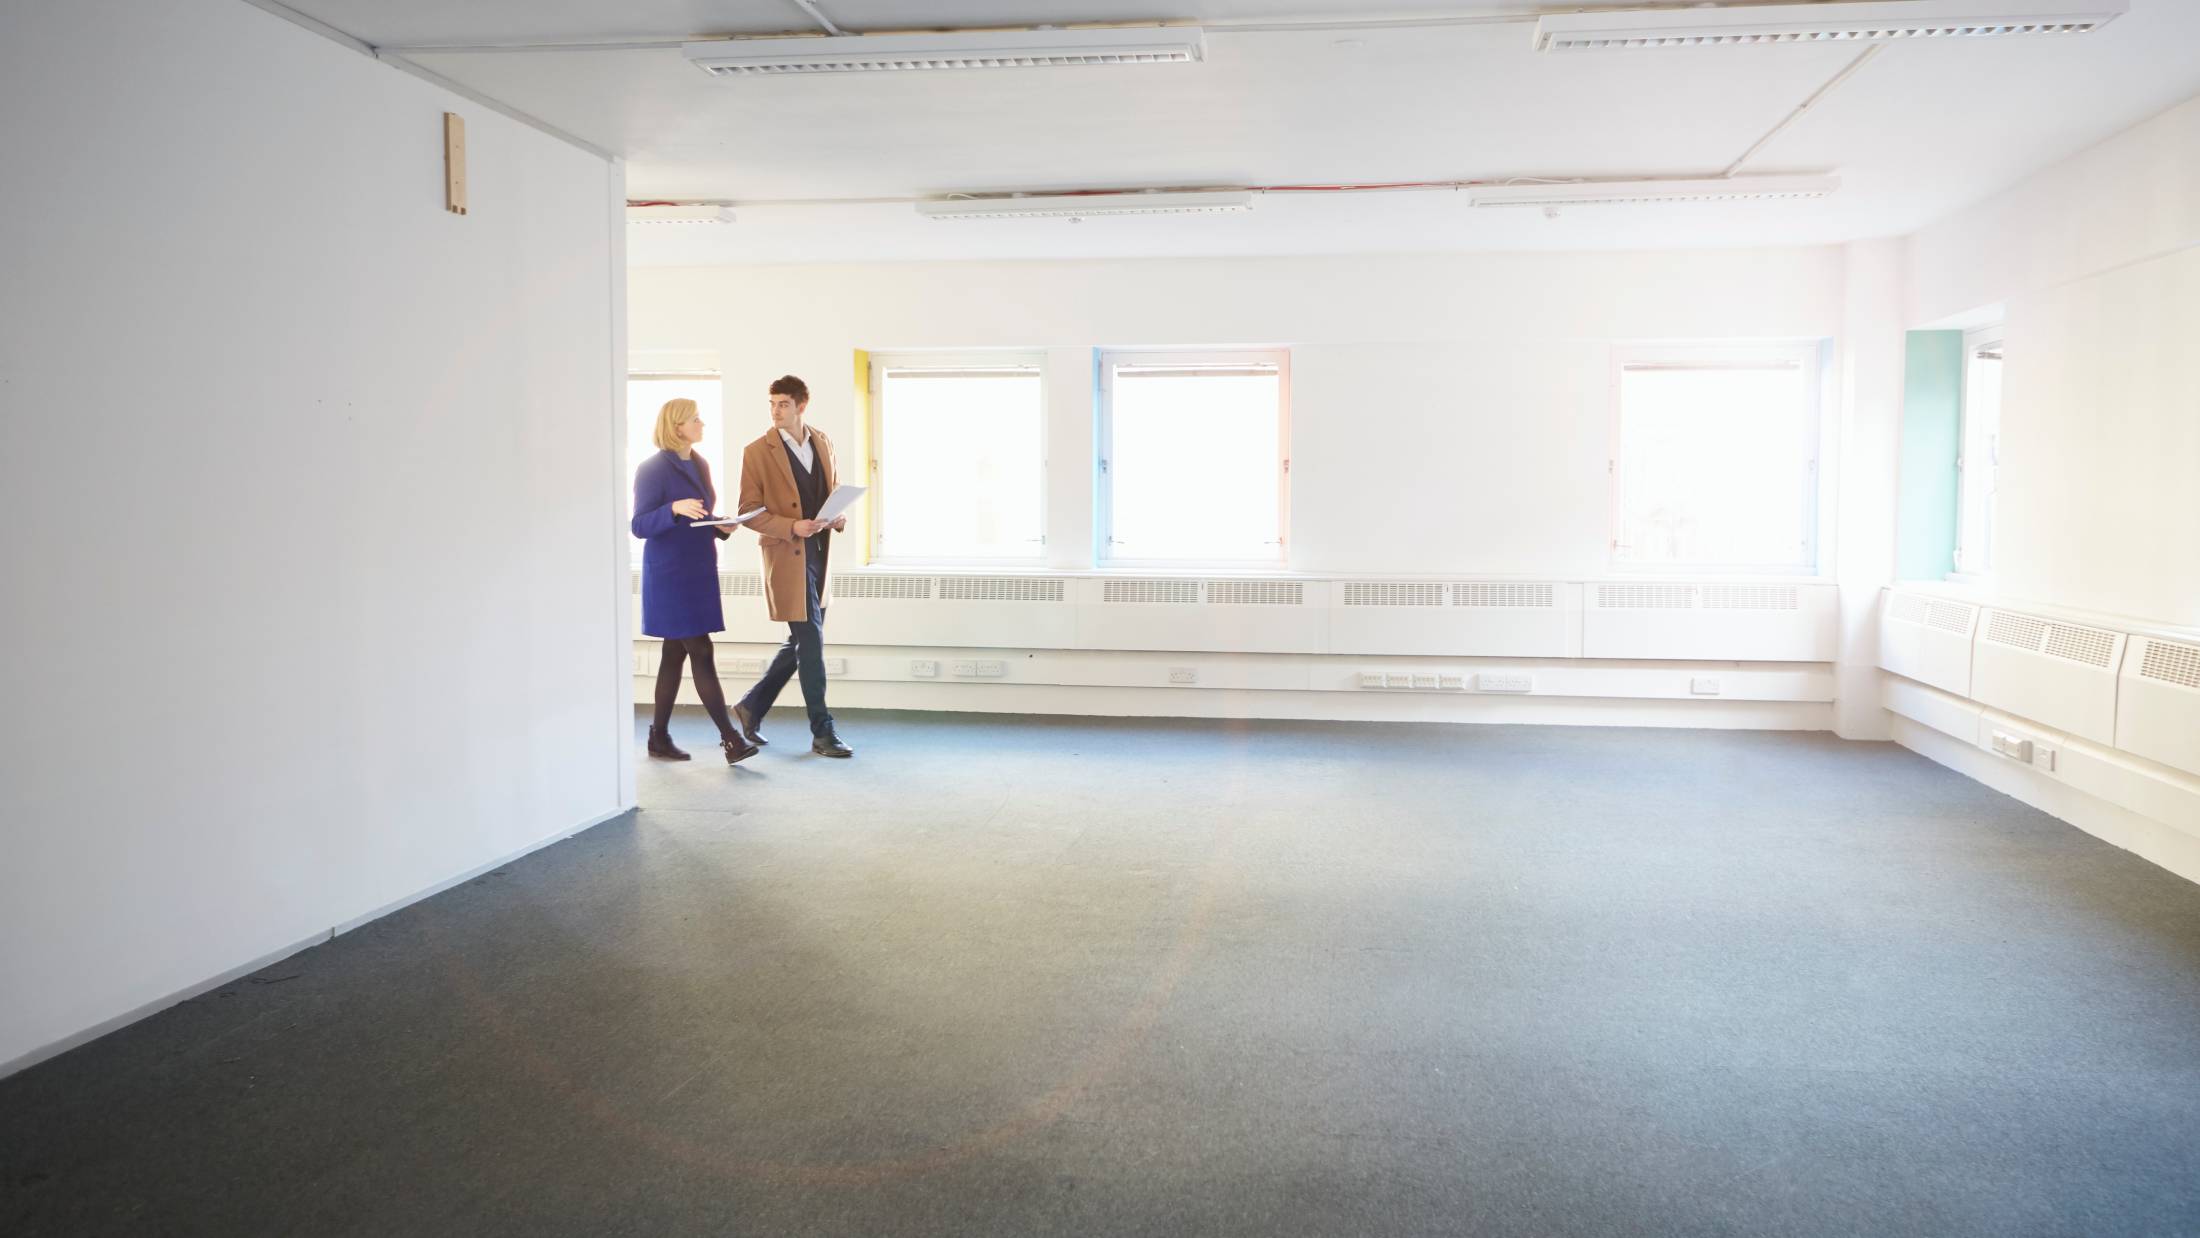 Two people walking around an empty building